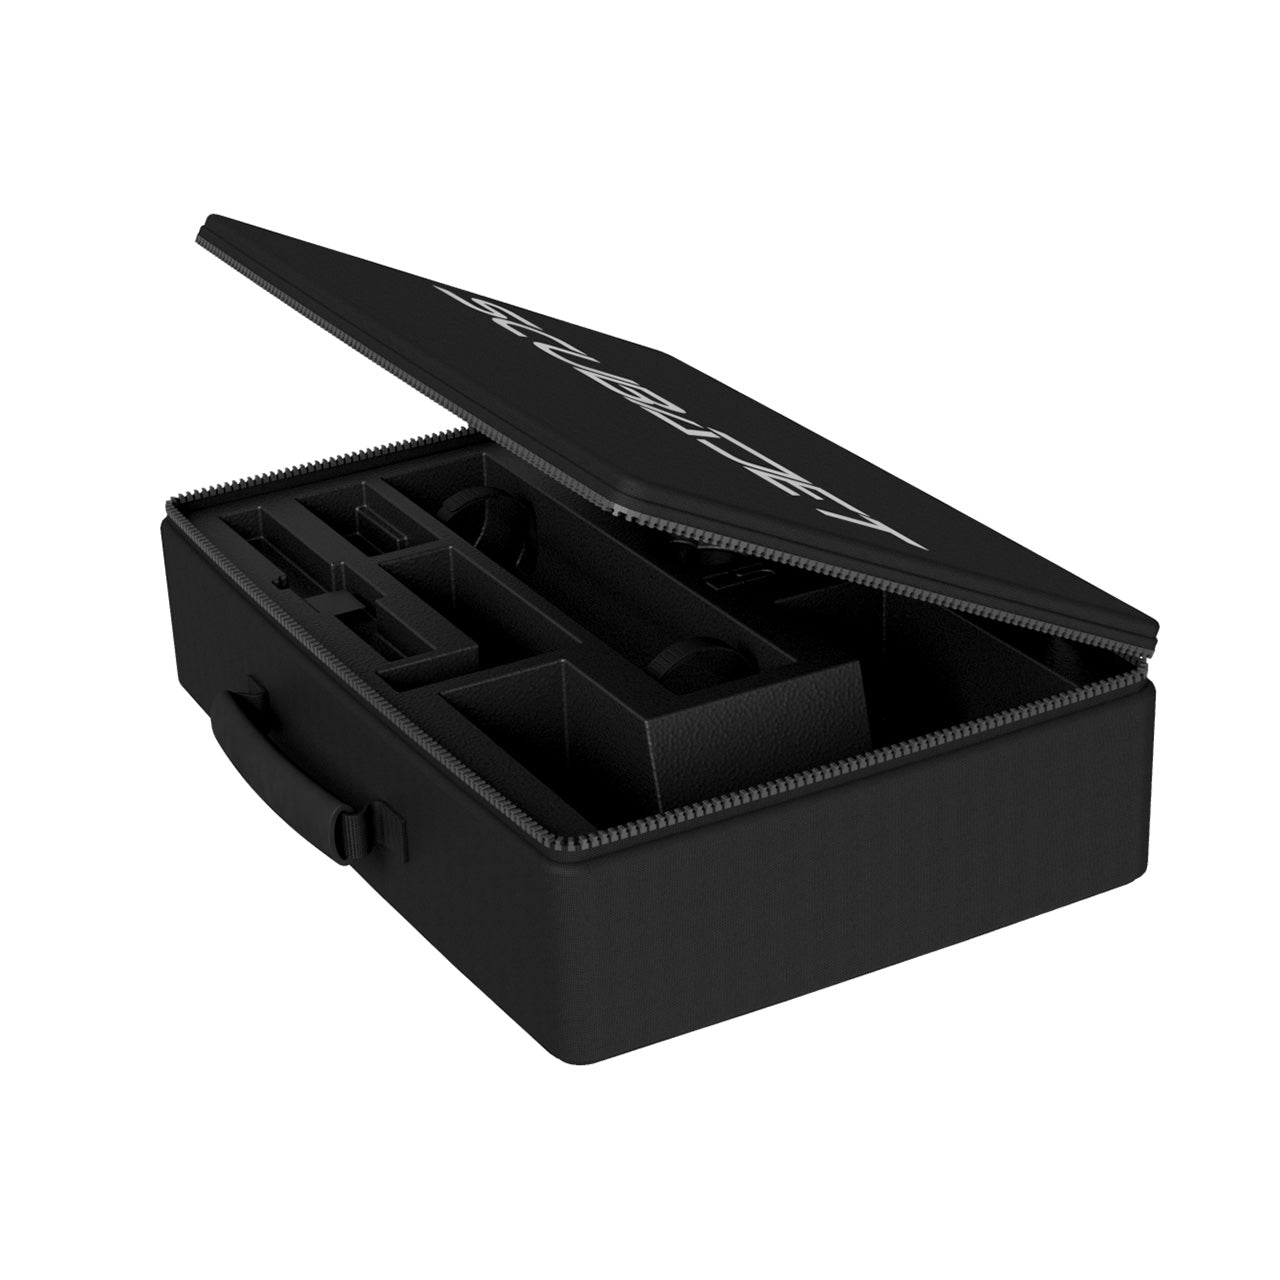 ScubaJet Pro Case. All black with white ScubaJet logo on the top. The top is open so that we can see in to see the sections of the case.